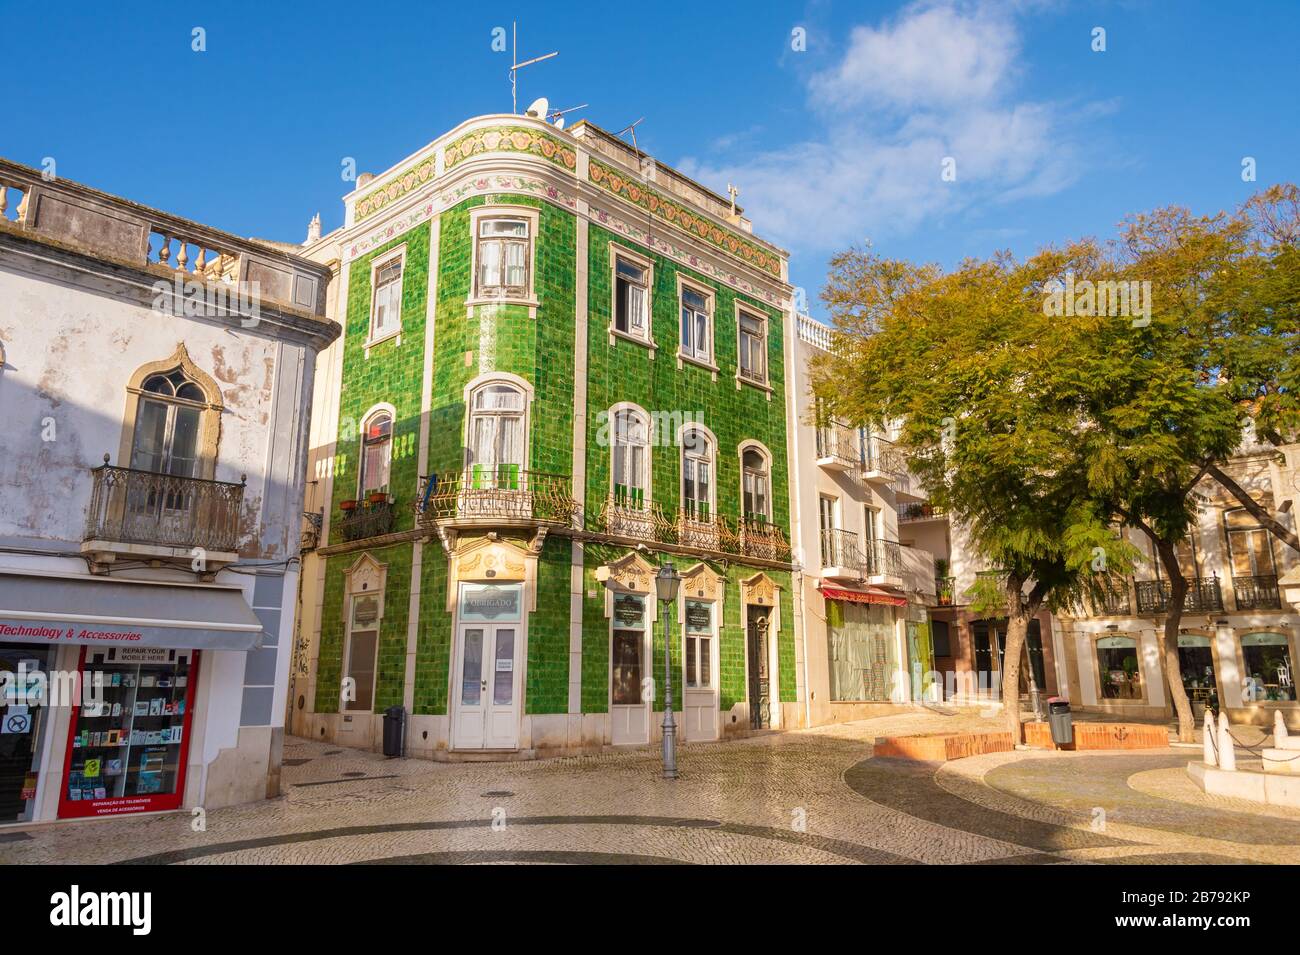 Lagos, Portugal - 5 March 2020: House with green ceramic tiles at the Praca de Camoes Stock Photo